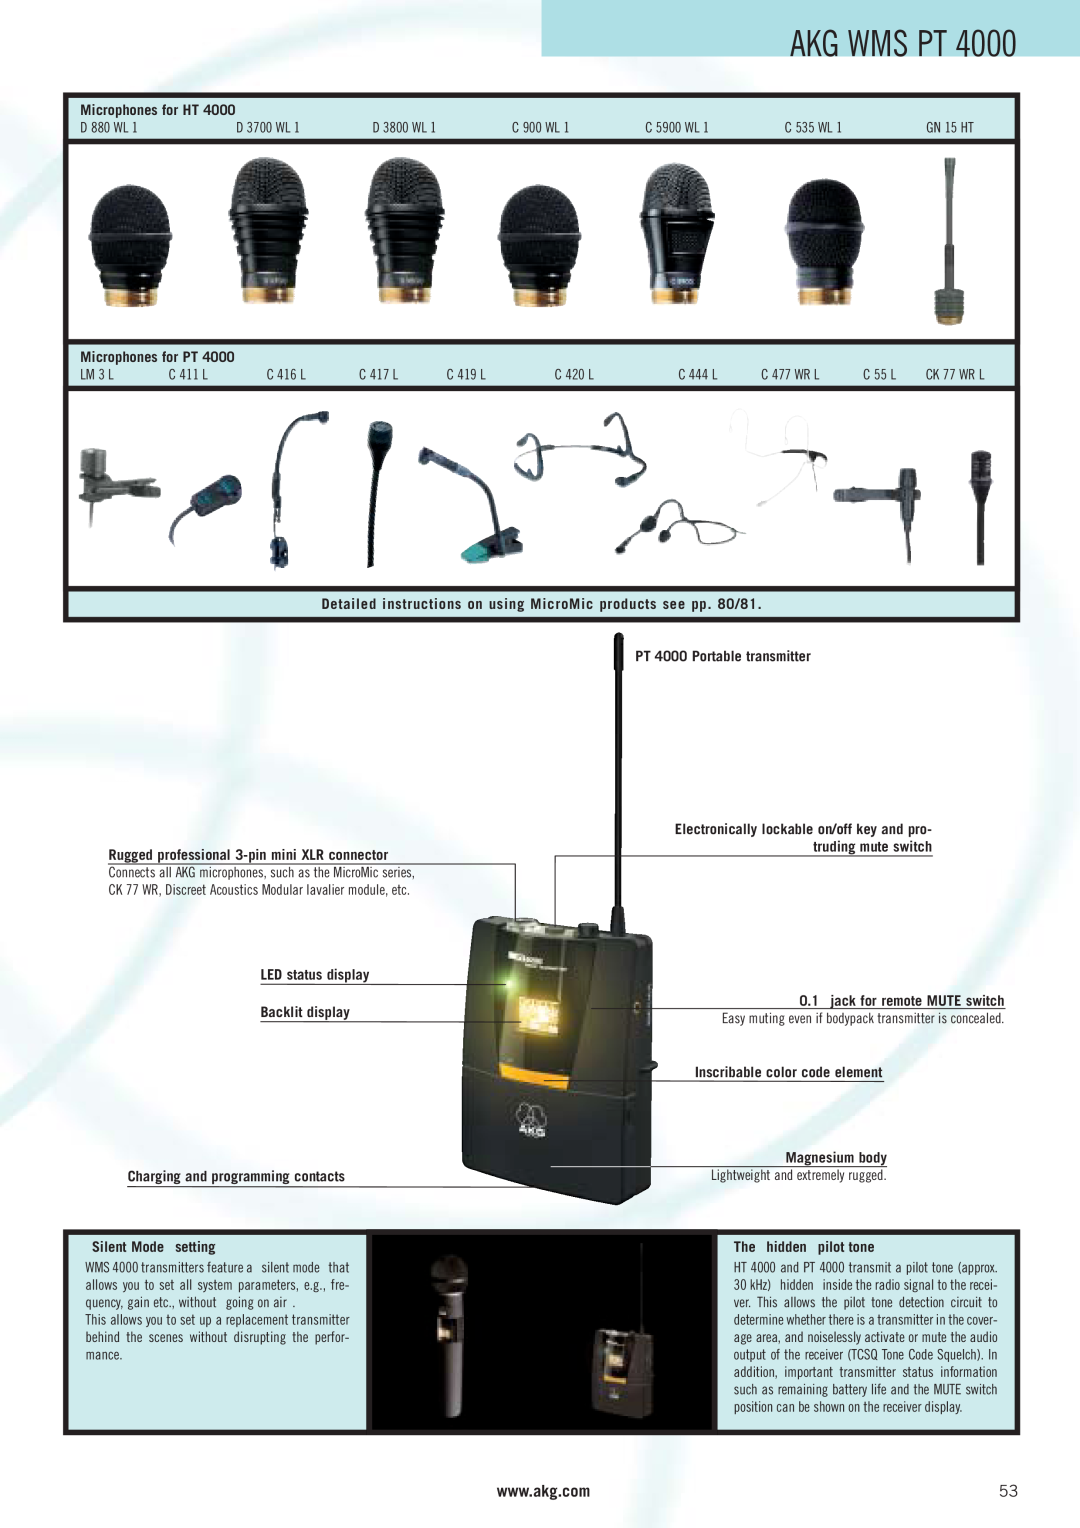 AKG Acoustics WMS 40 manual Akg Wms Pt, Microphones for PT, Detailed instructions on using MicroMic products see pp. 80/81 